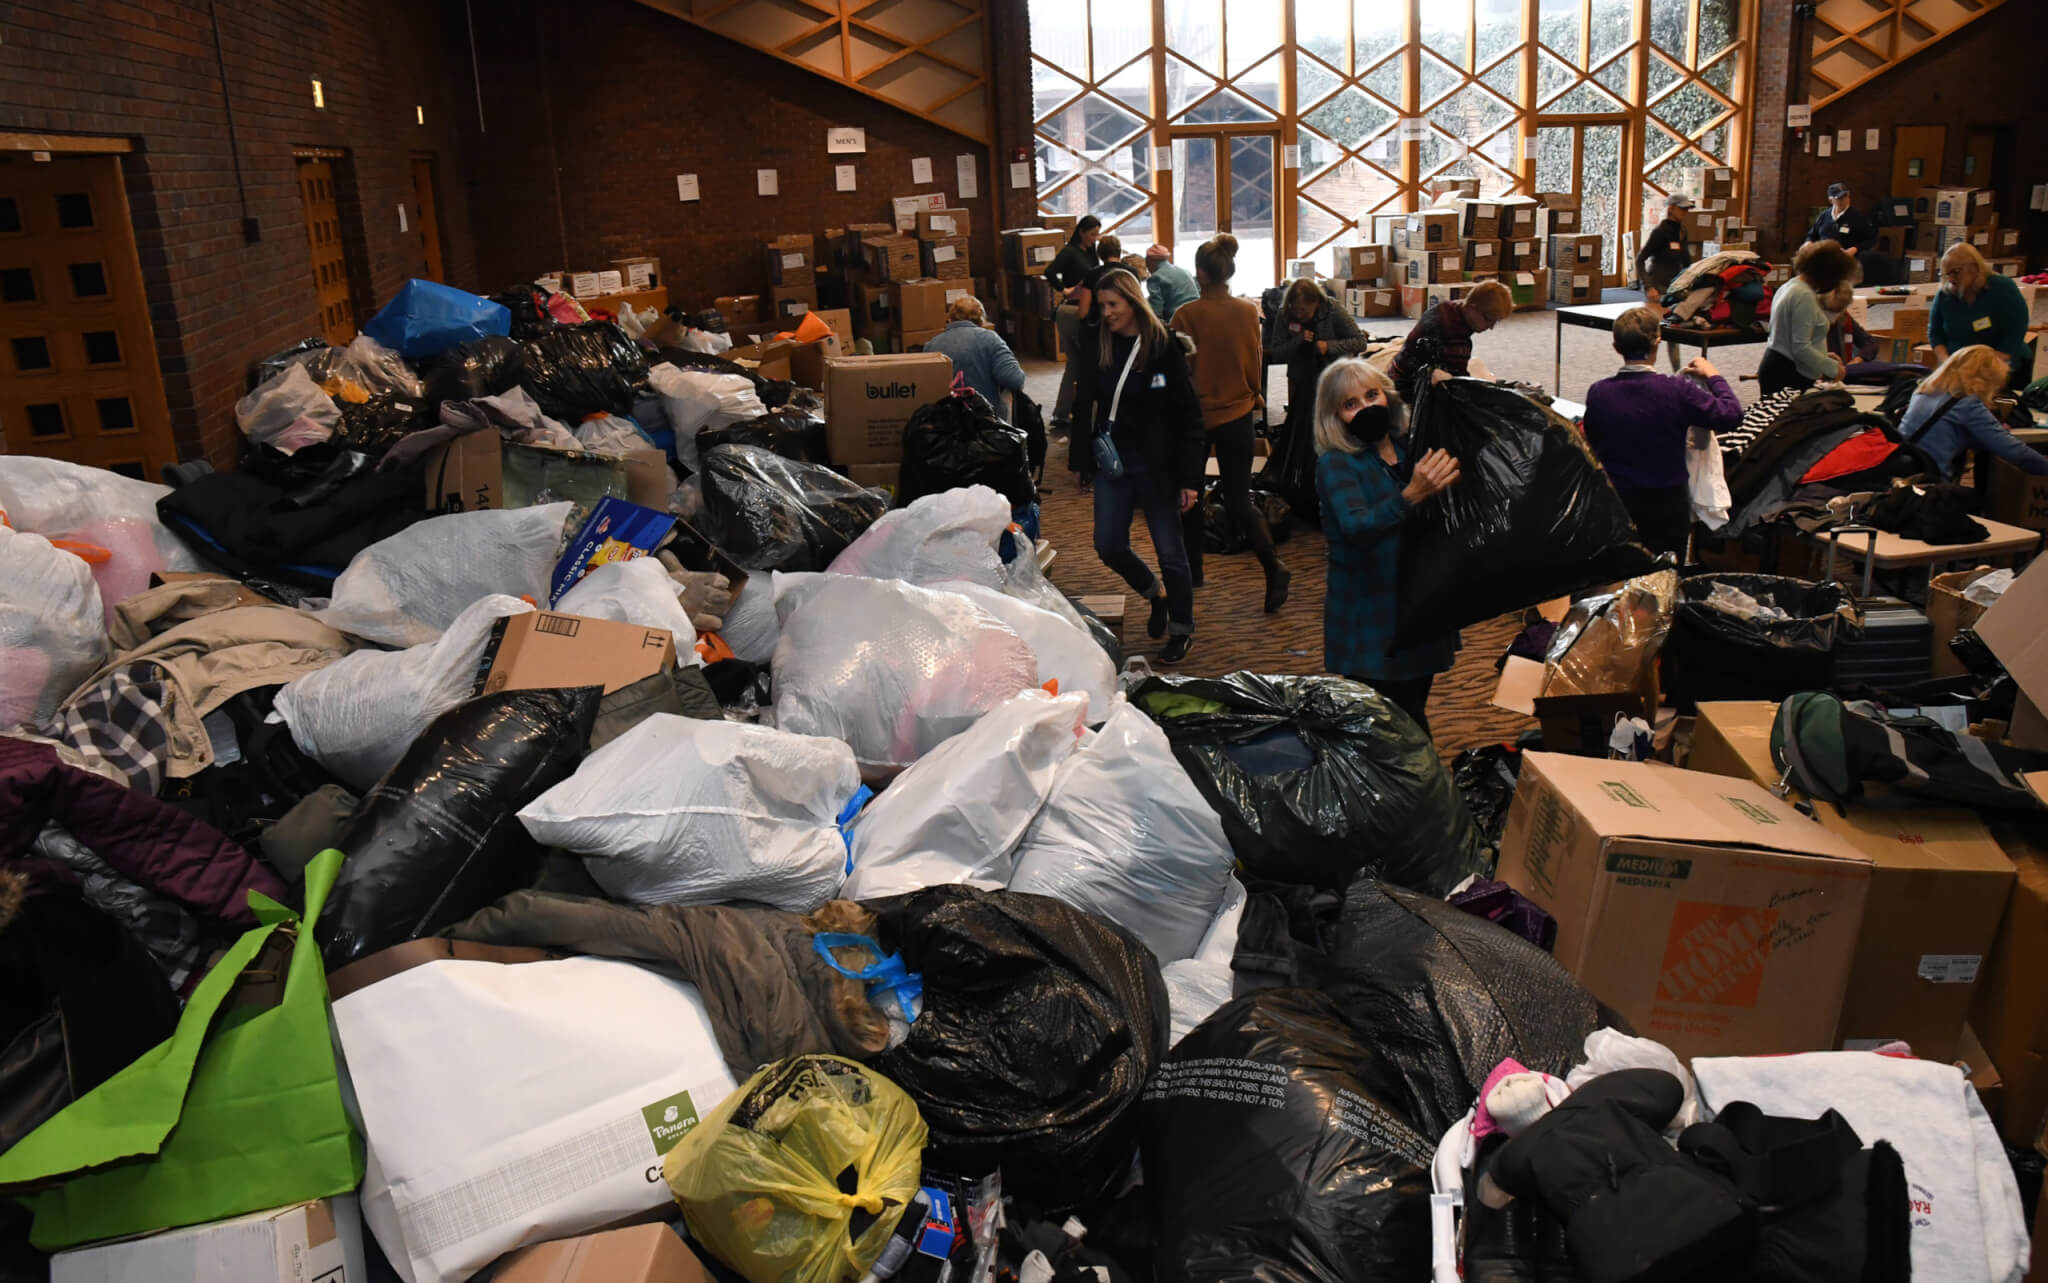 Donations in Temple Emanuel social hall